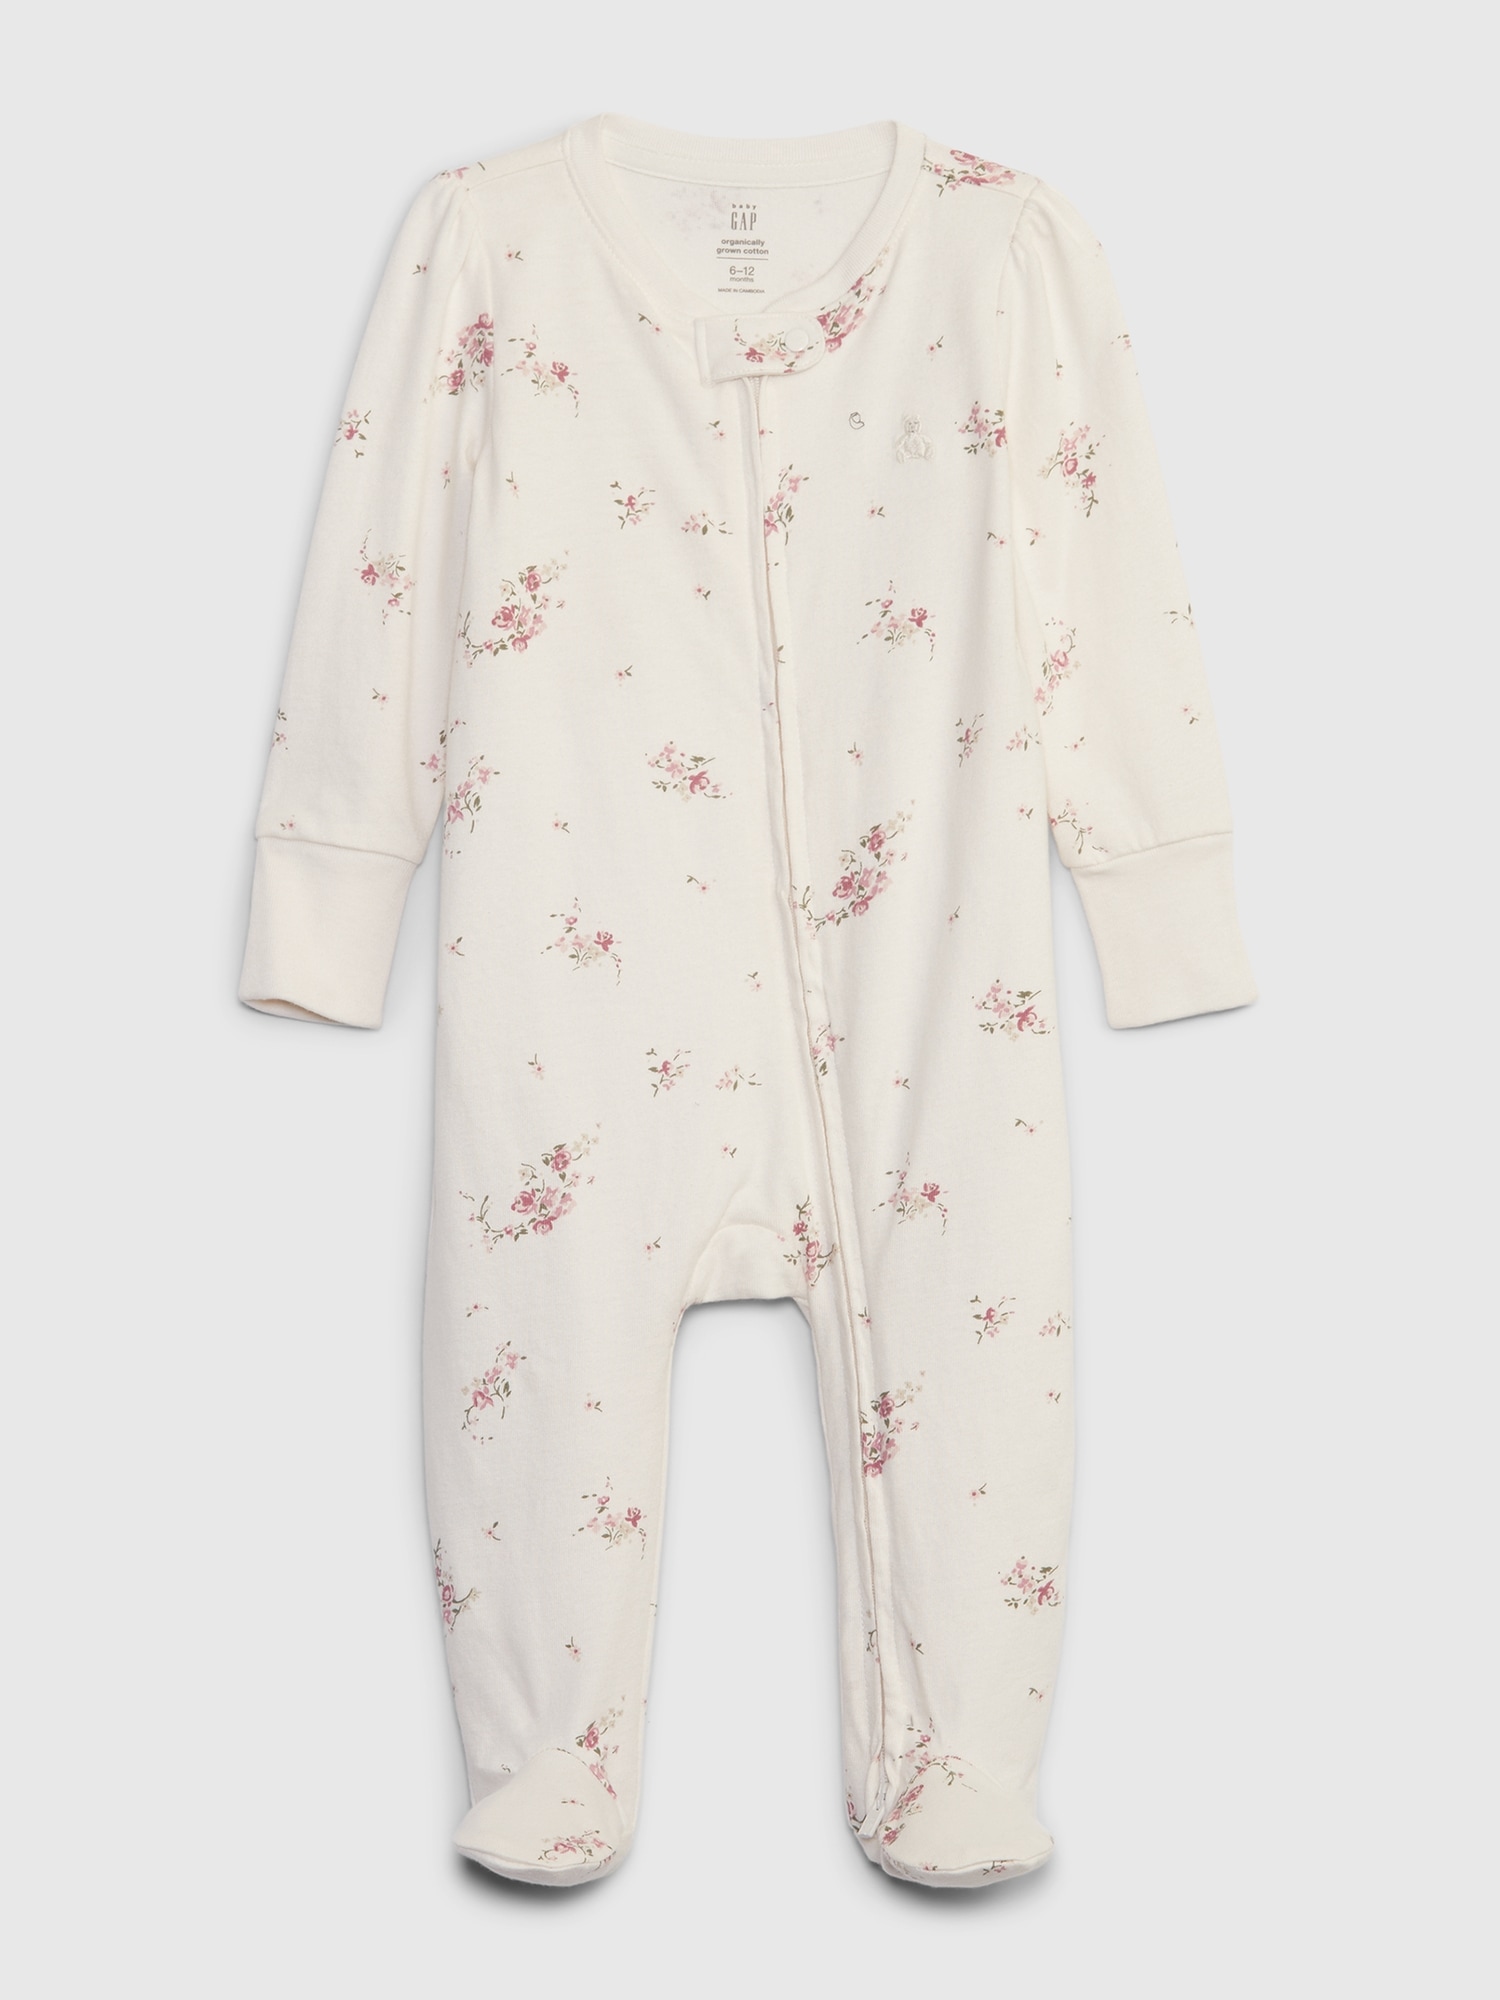 Baby First Favorites Organic CloudCotton Footed One-Piece